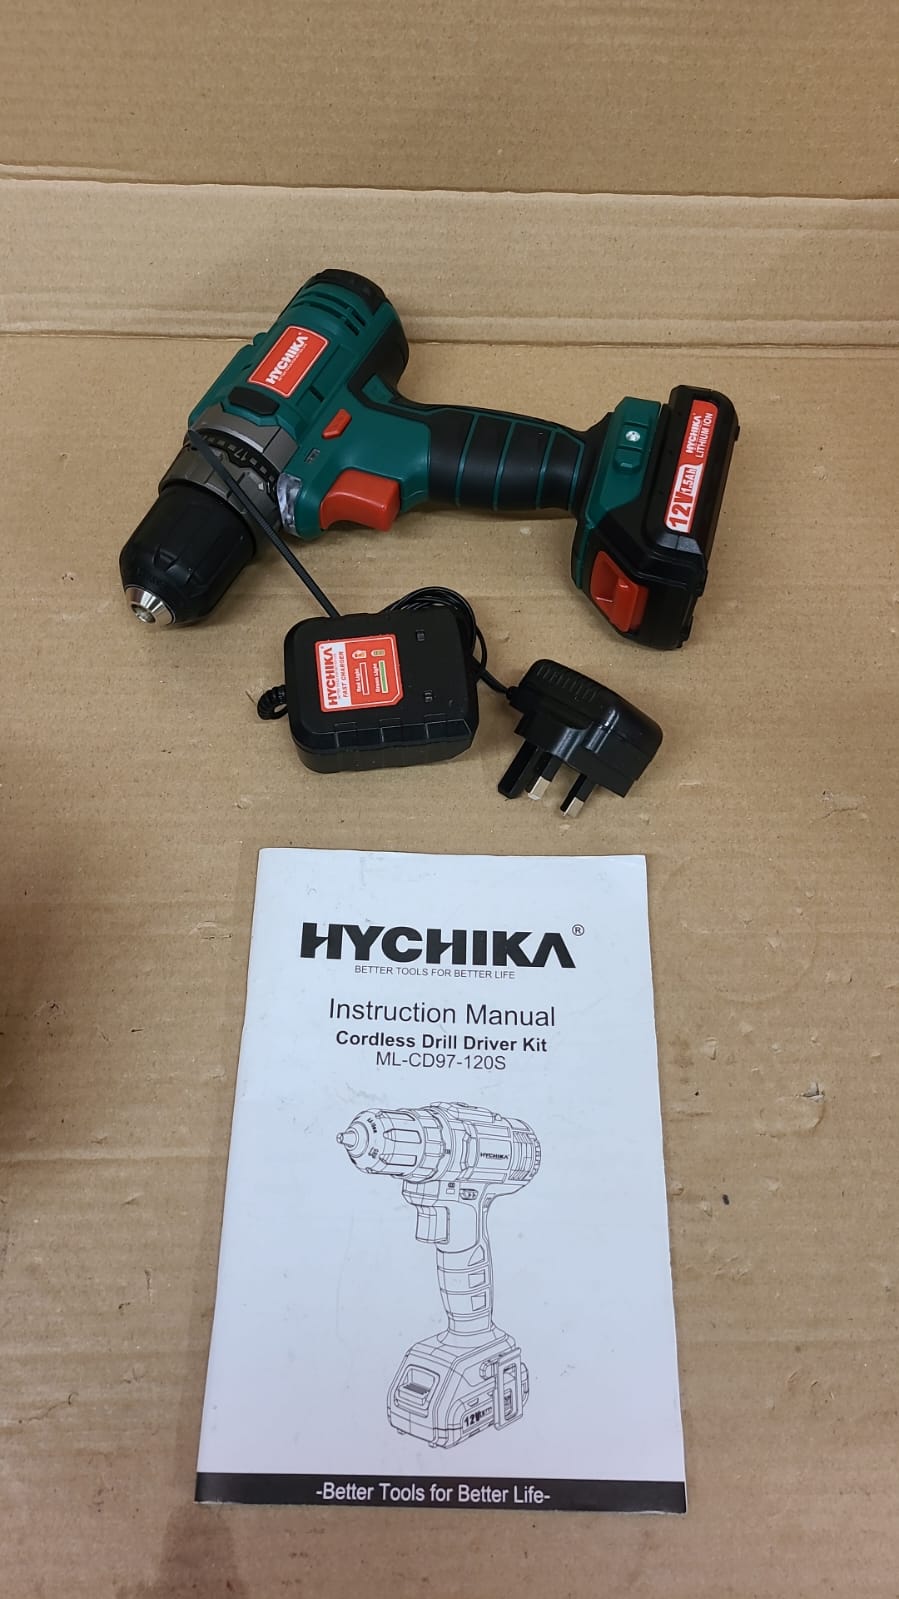 Cordless Drill 12V, HYCHIKA Electric Screwdriver-4746